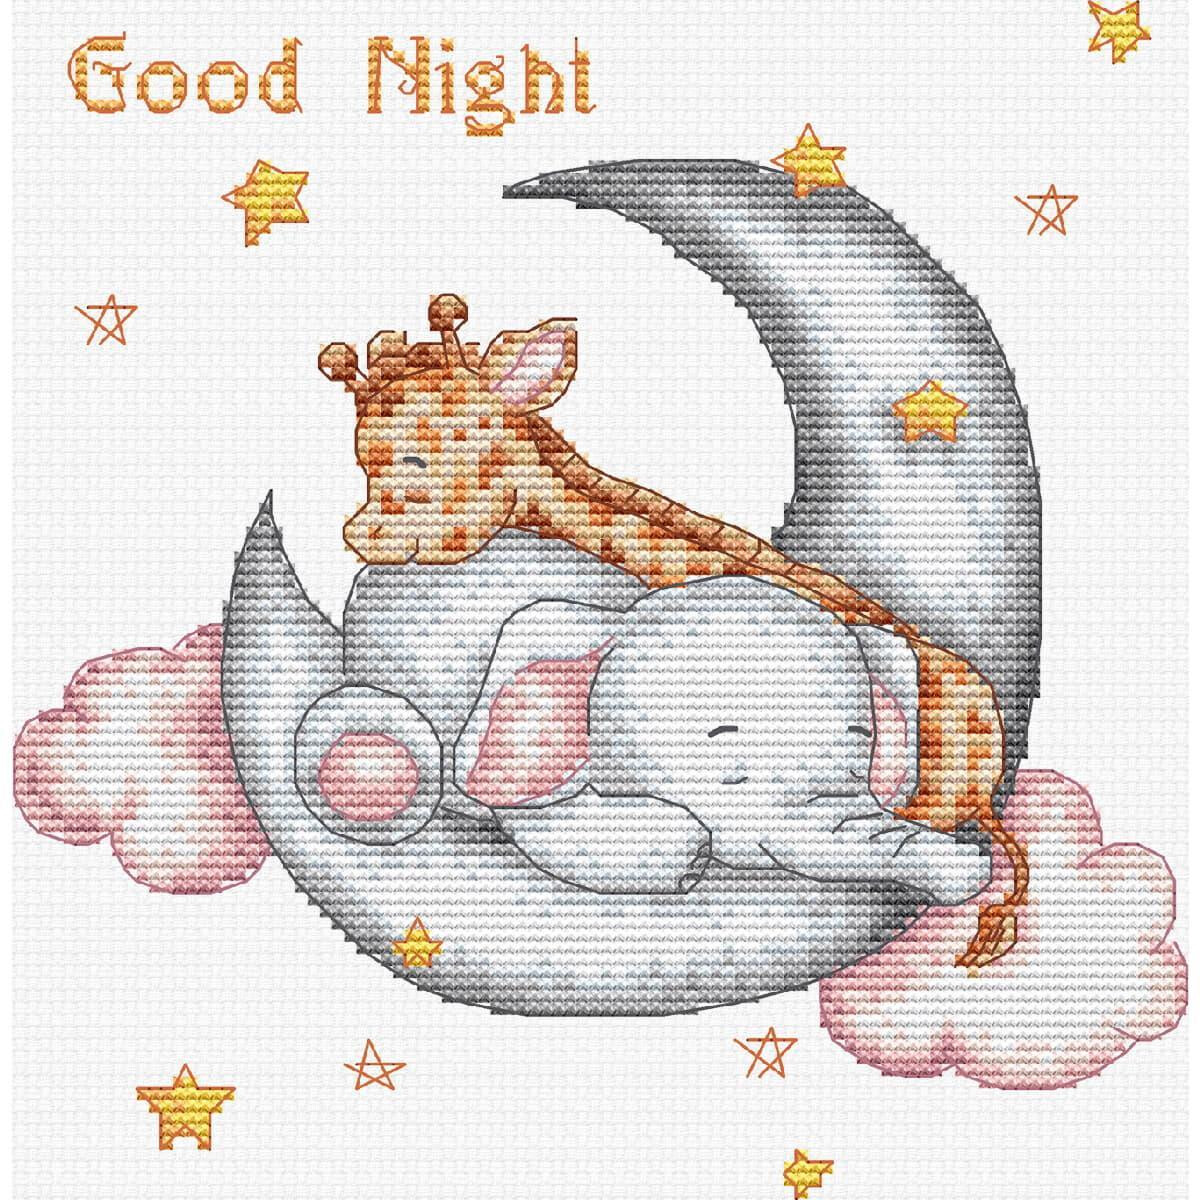 One image from Luca-s embroidery kit features a sleeping...